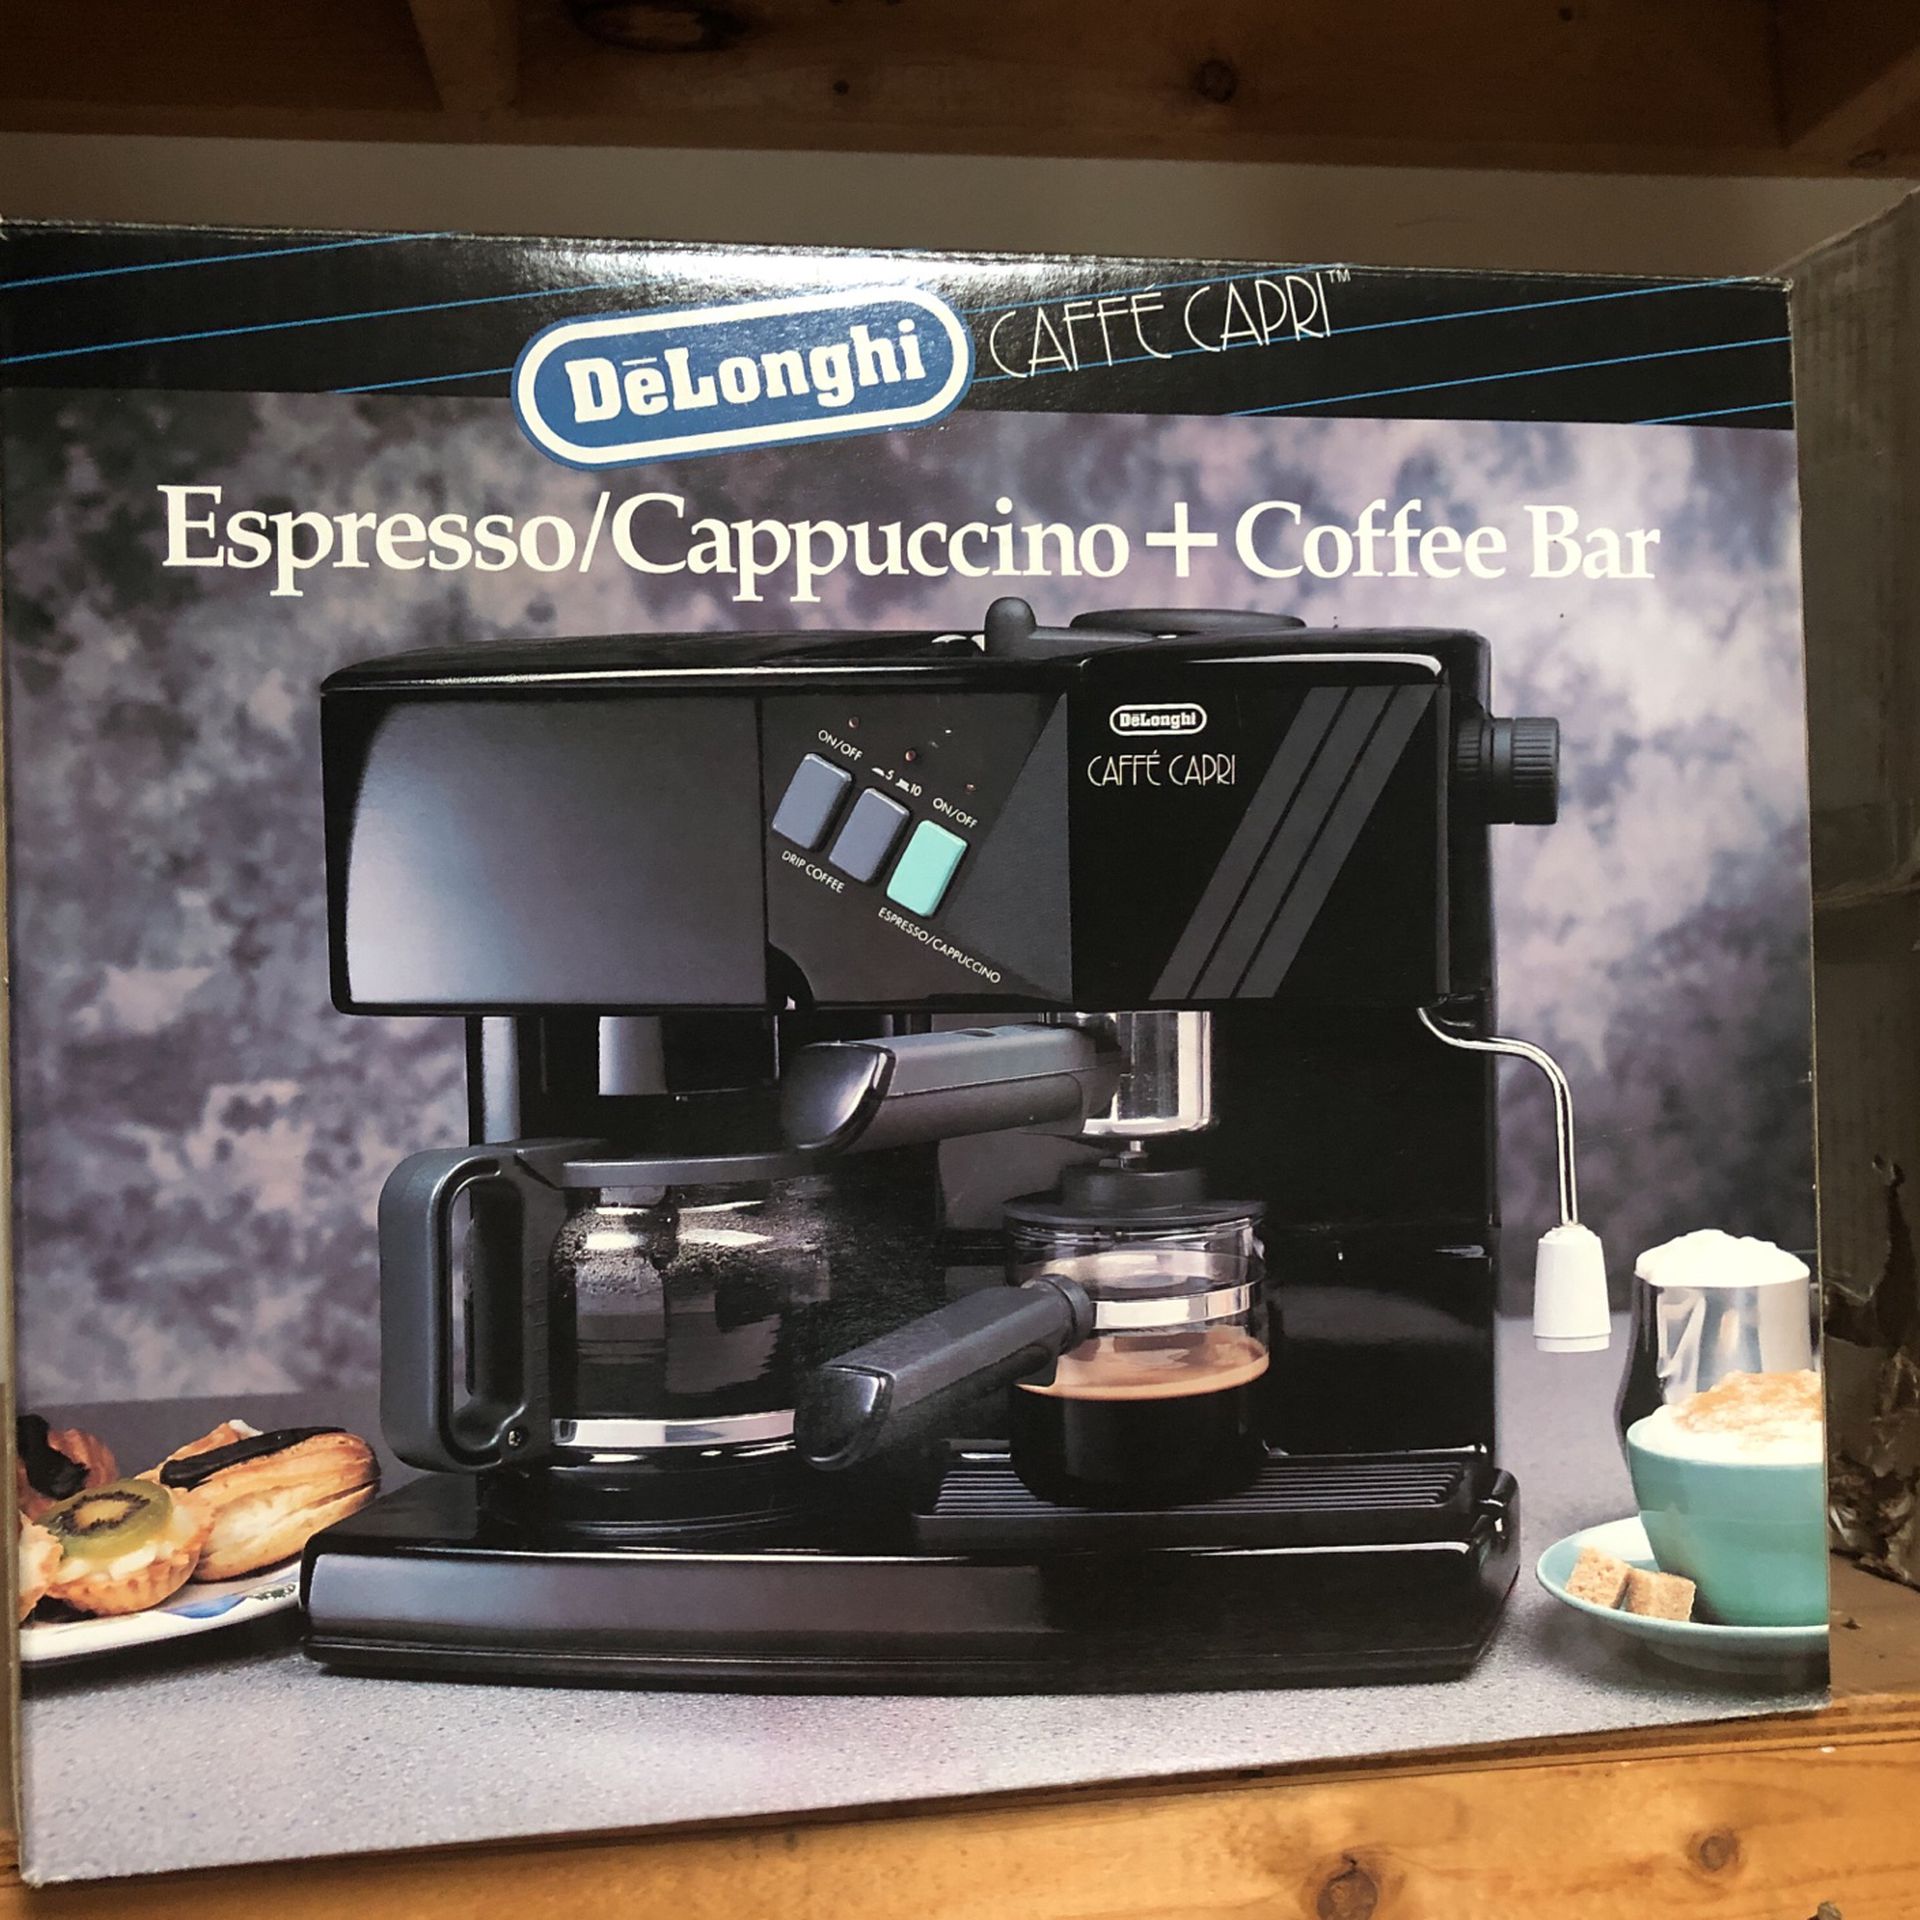 Delonghi expresso/cappuccinos and Coffee Maker